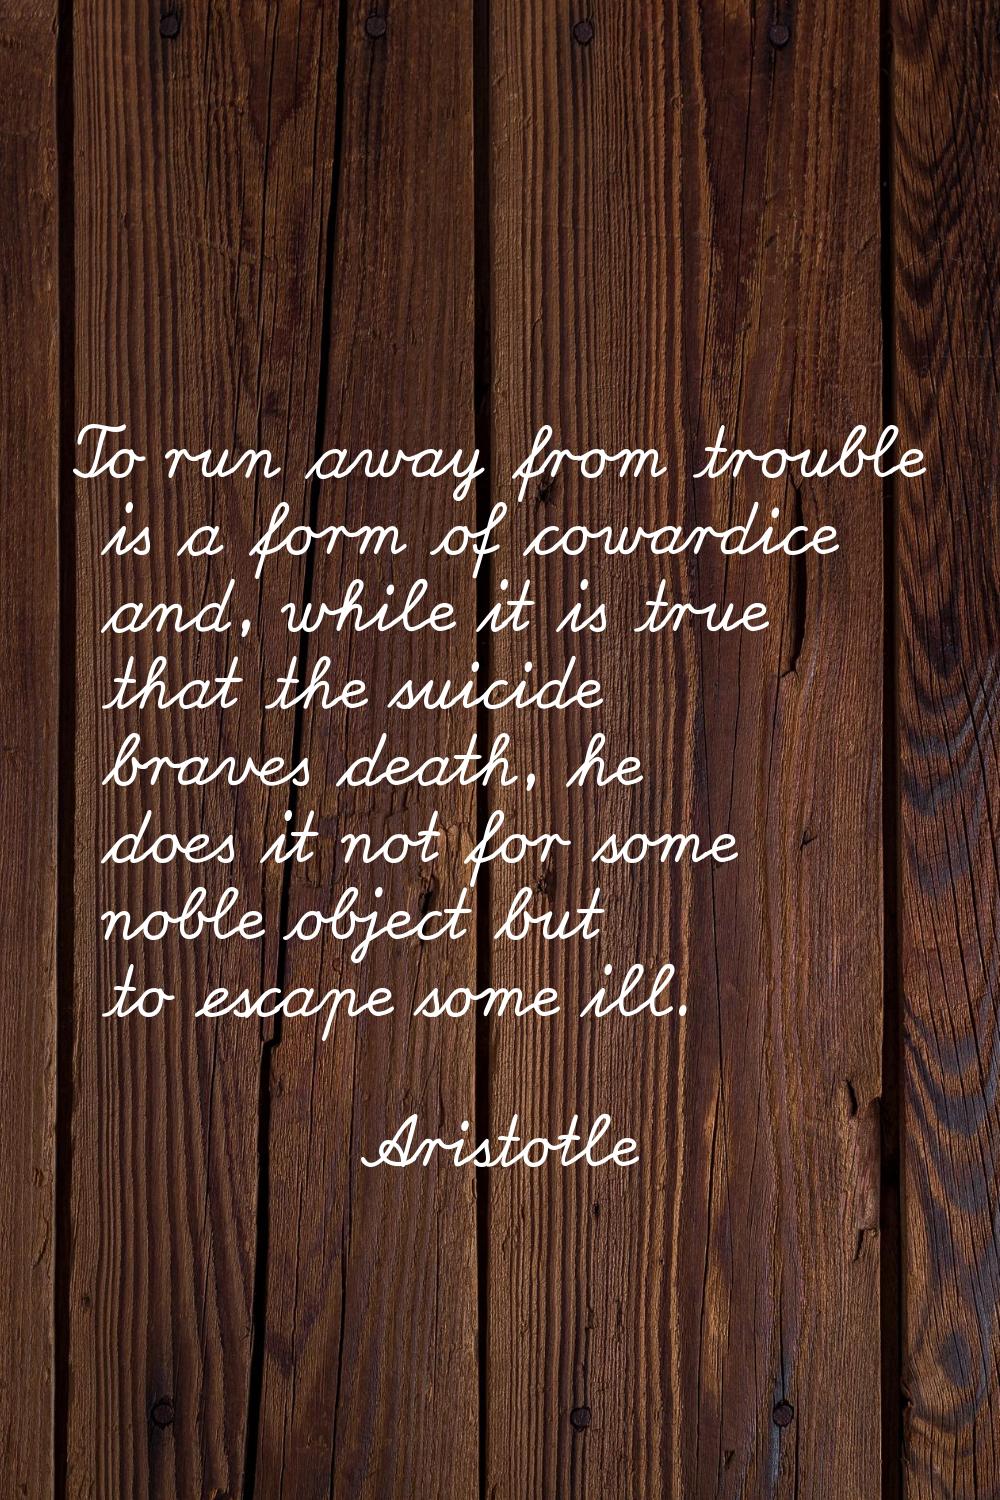 To run away from trouble is a form of cowardice and, while it is true that the suicide braves death